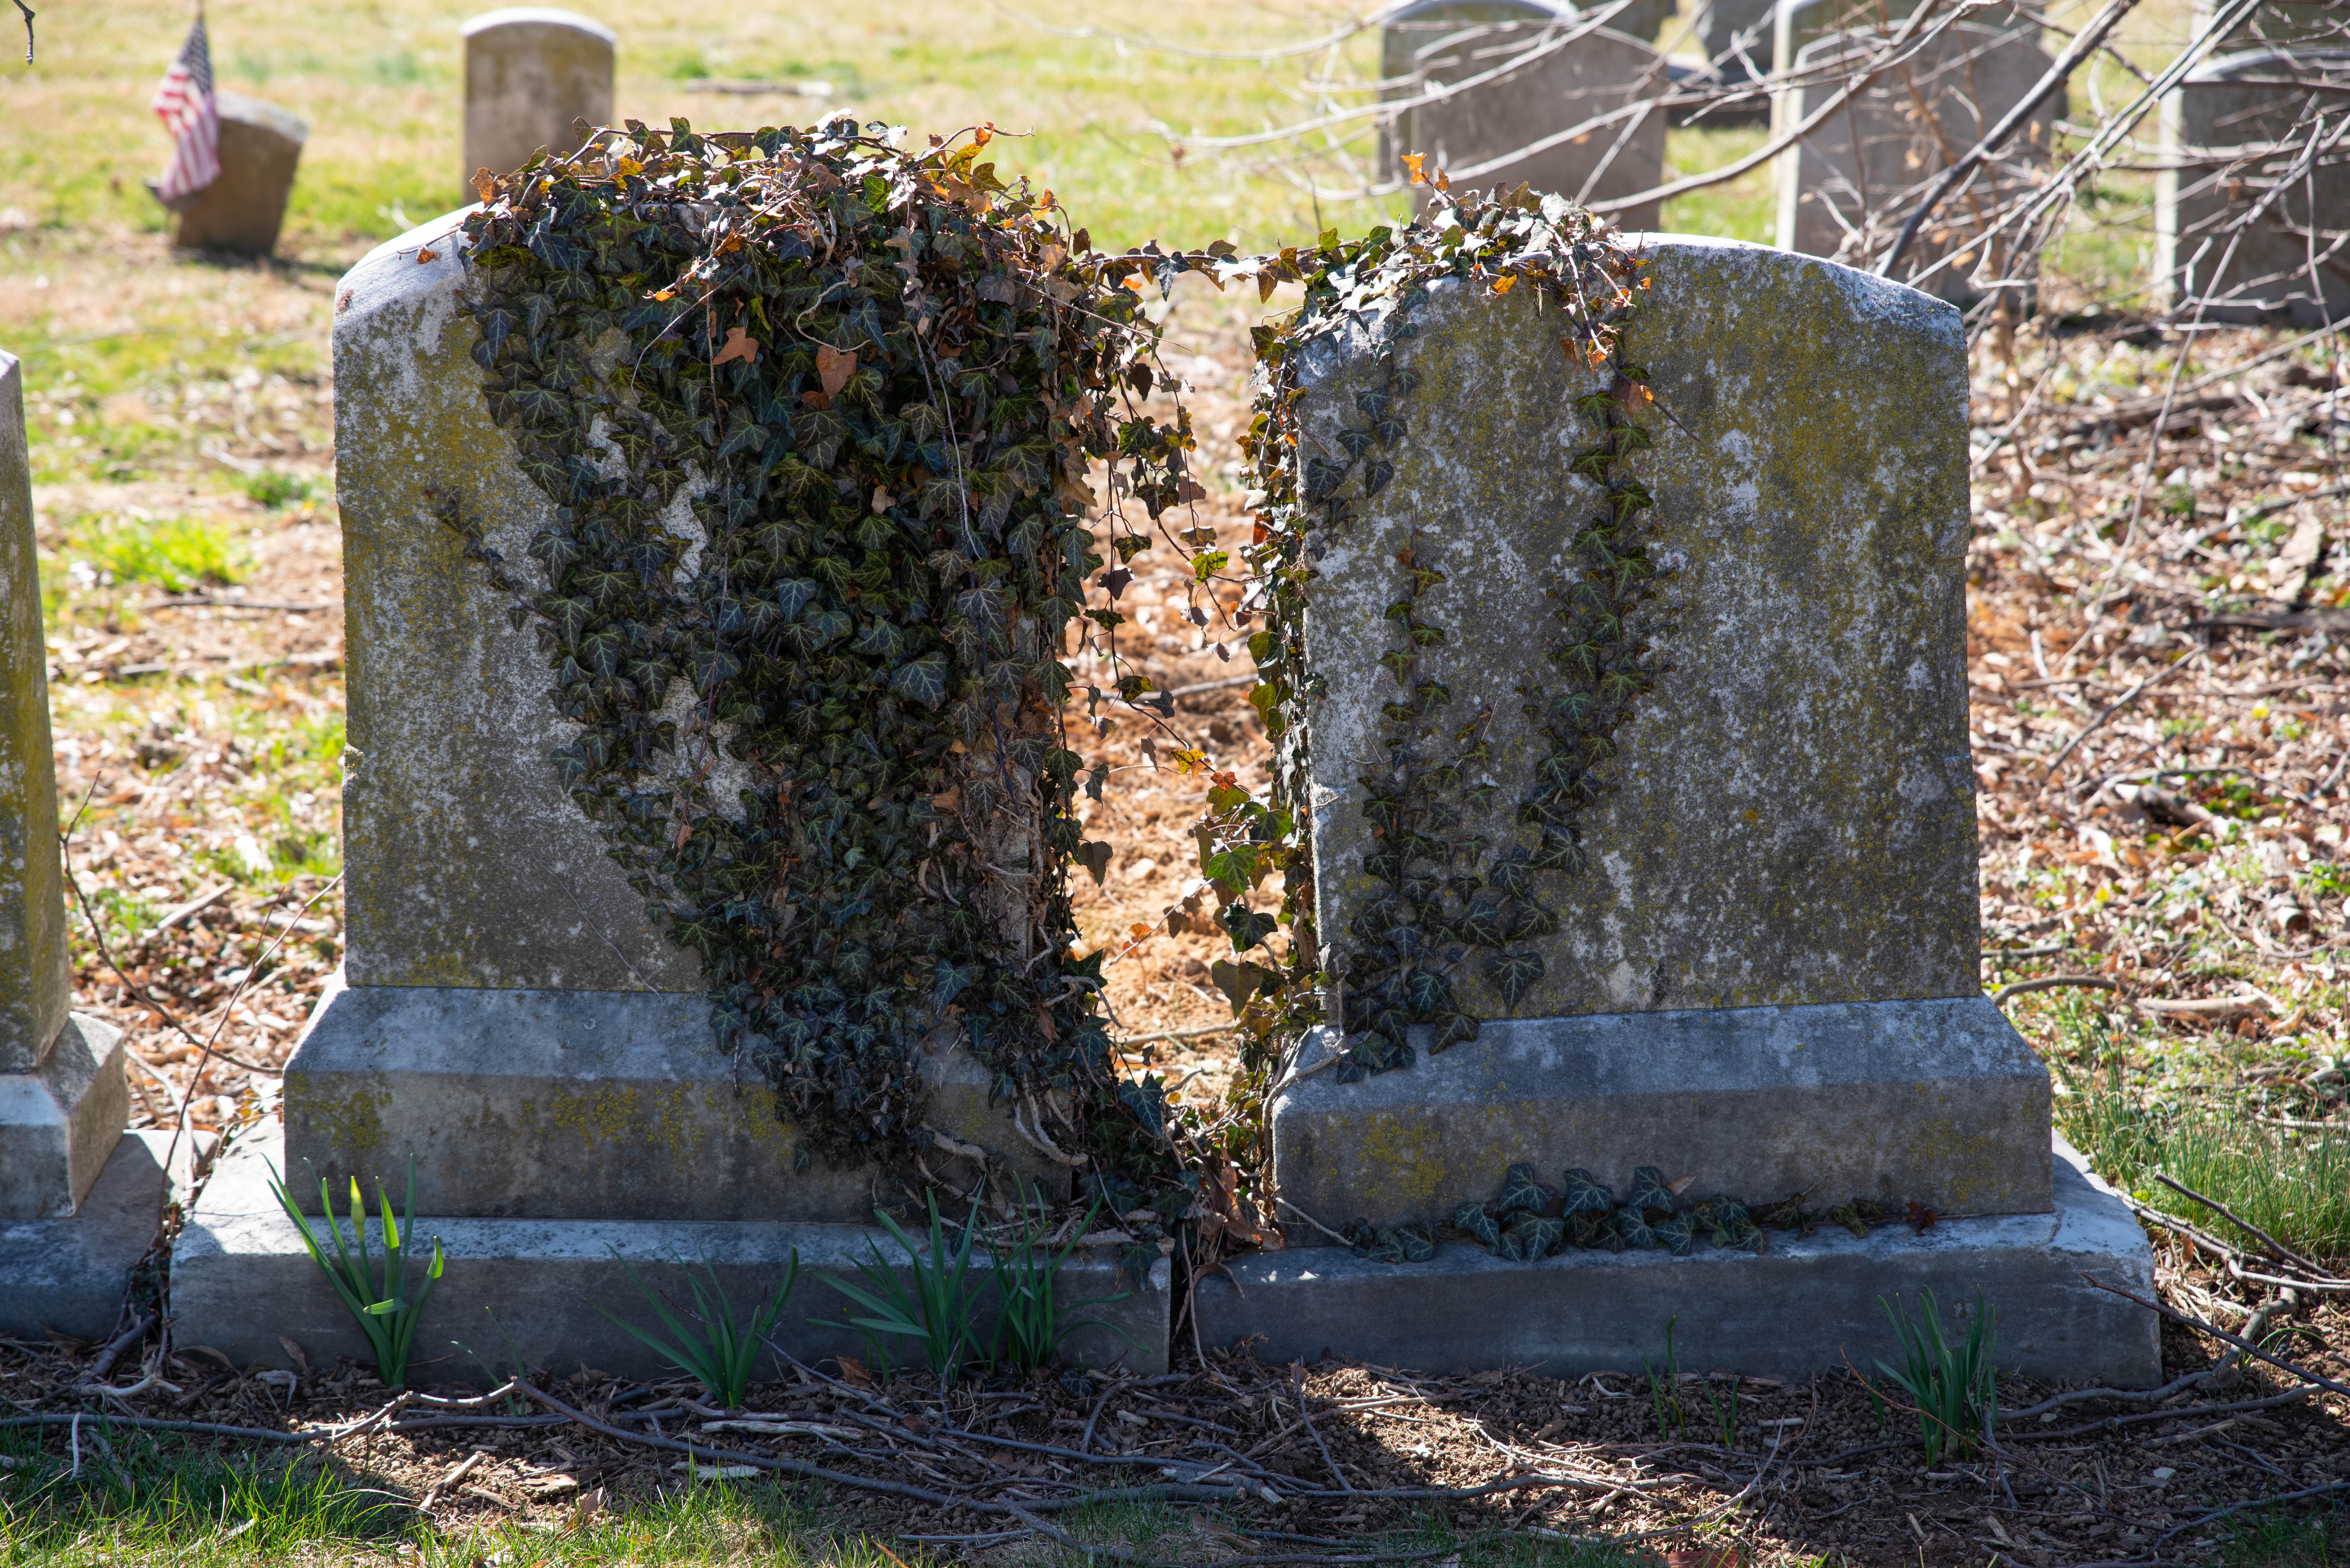 Overgrown tombs in a cemetery | Source: Shutterstock